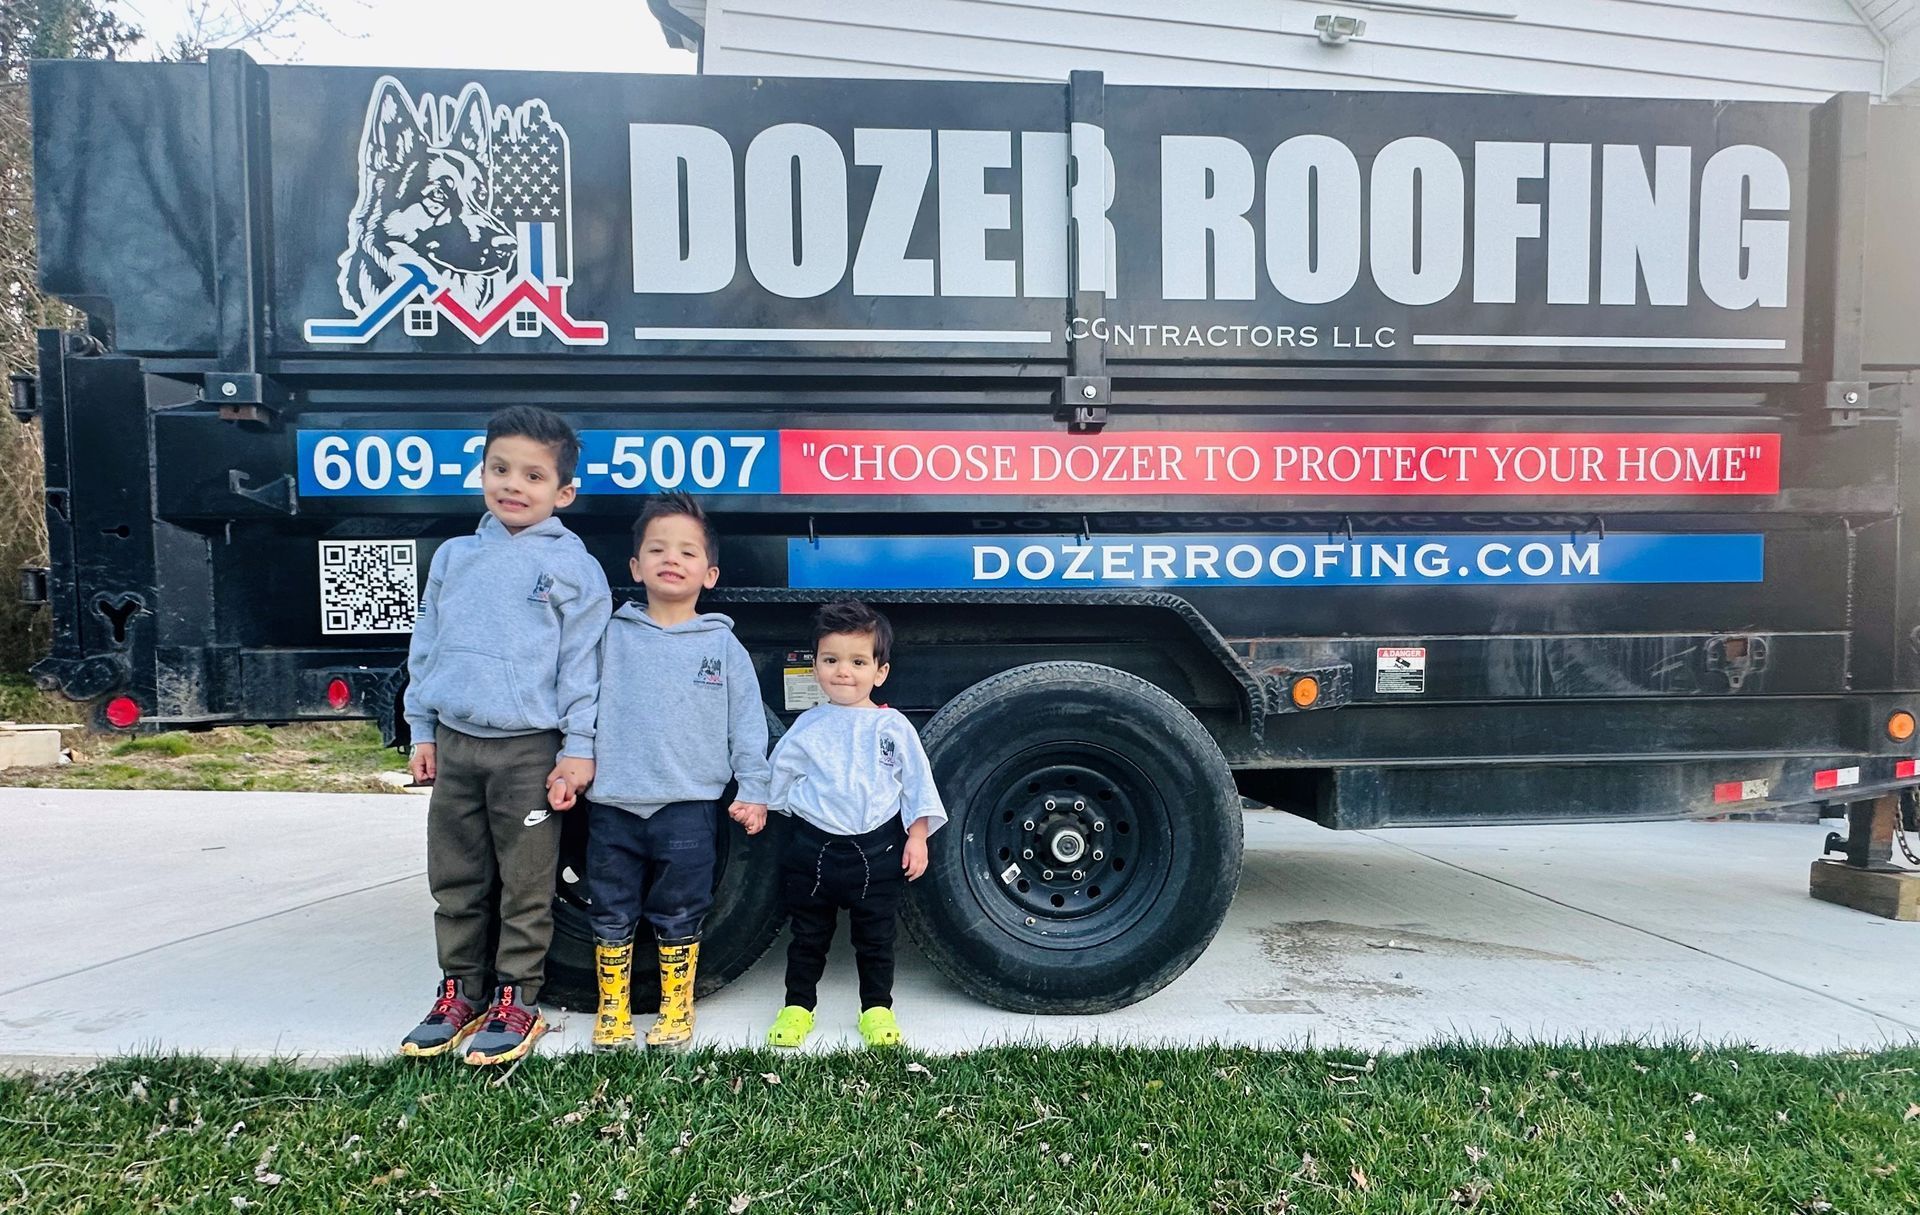 Three young boys are standing in front of a dozer roofing trailer.